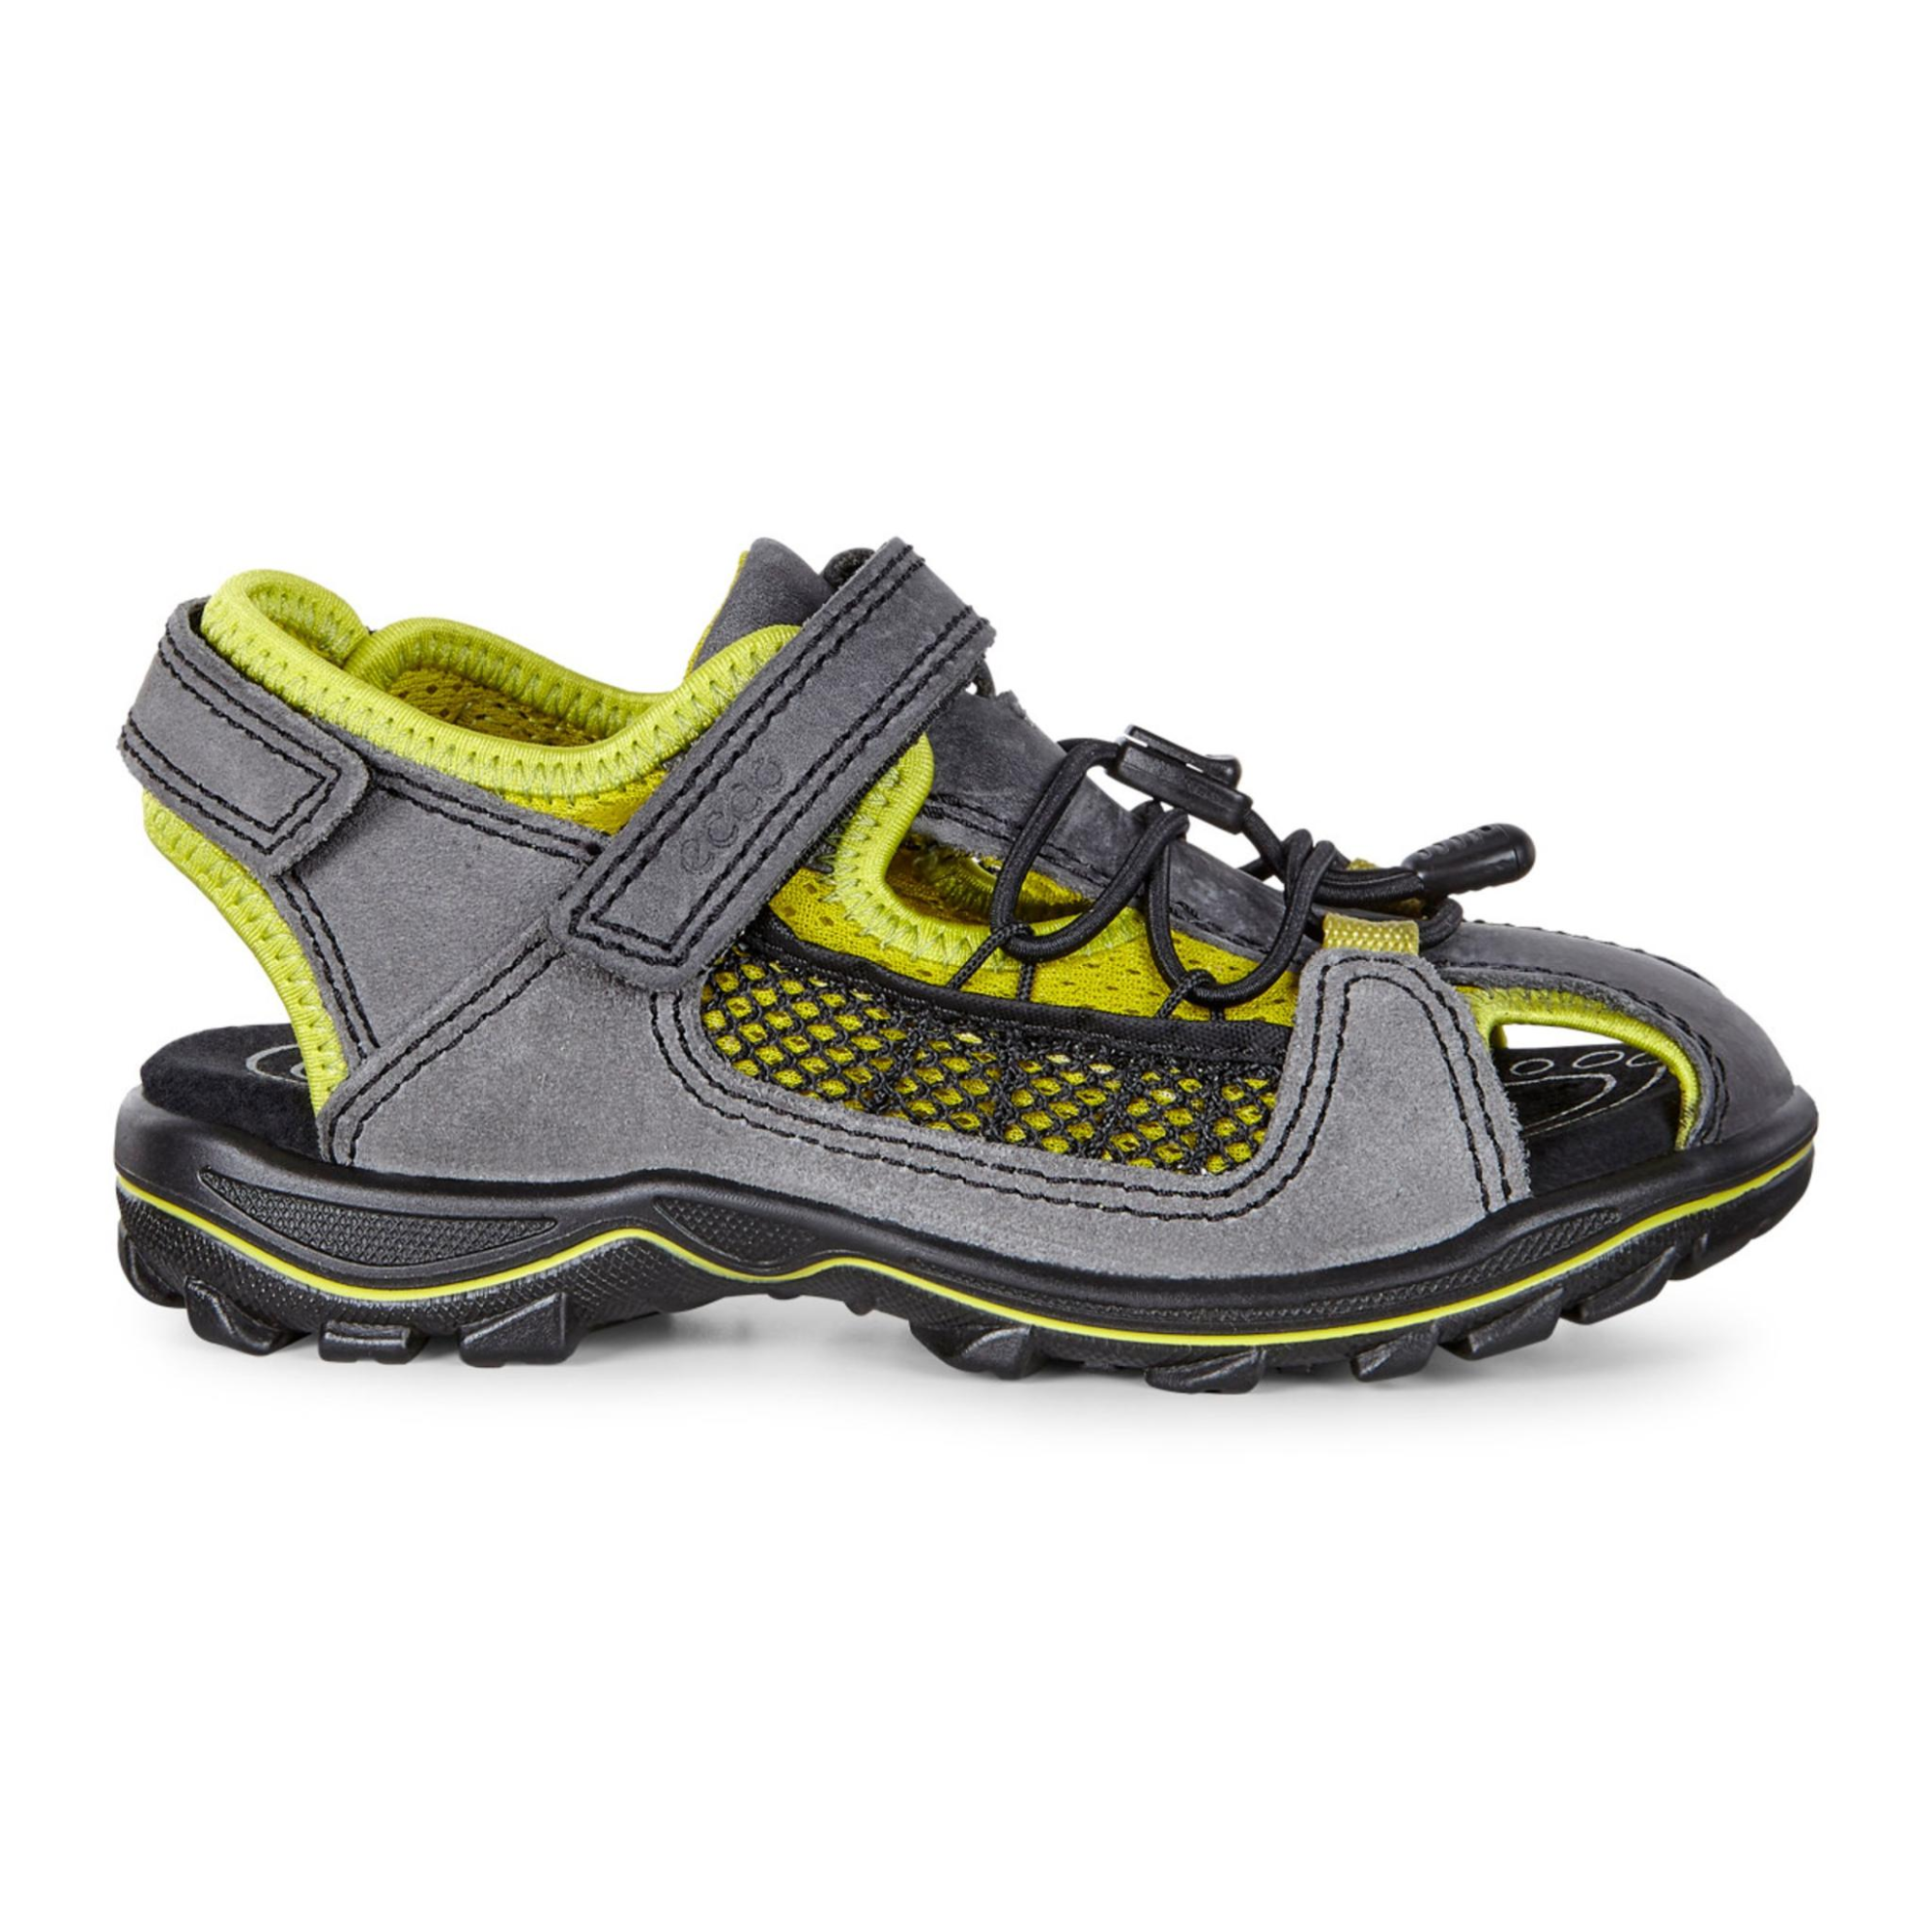 Ecco Safari Sandal 26 - Products - Veryk Mall Veryk Mall, many product, quick response, safe money!